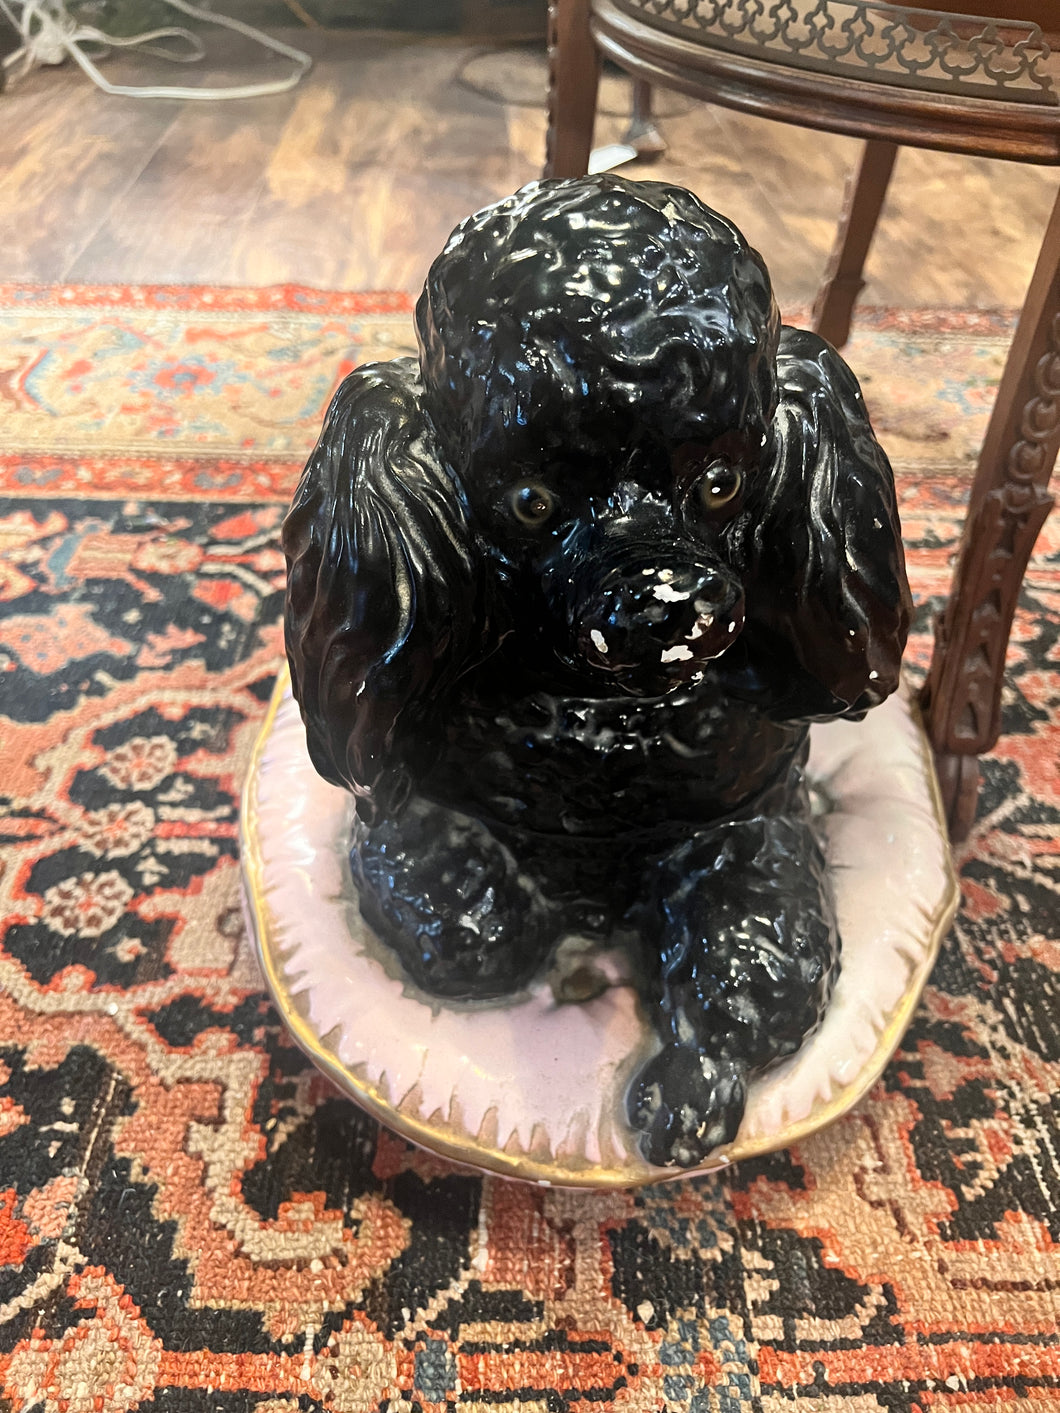 Vintage 1950s chalkware poodle on a pillow extra large